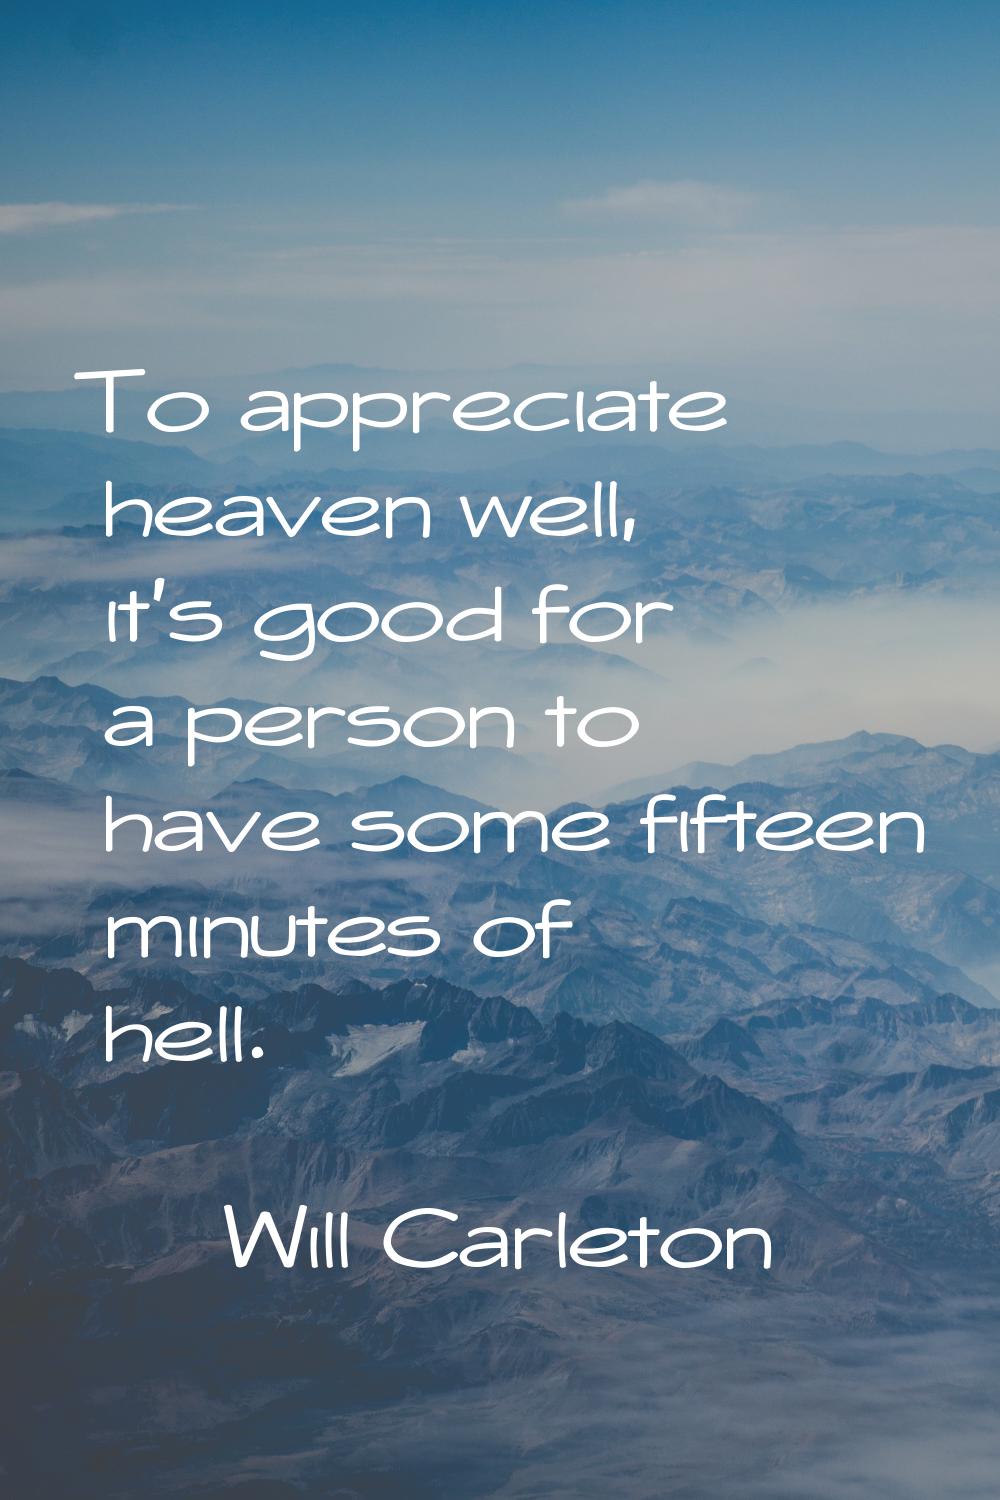 To appreciate heaven well, it's good for a person to have some fifteen minutes of hell.